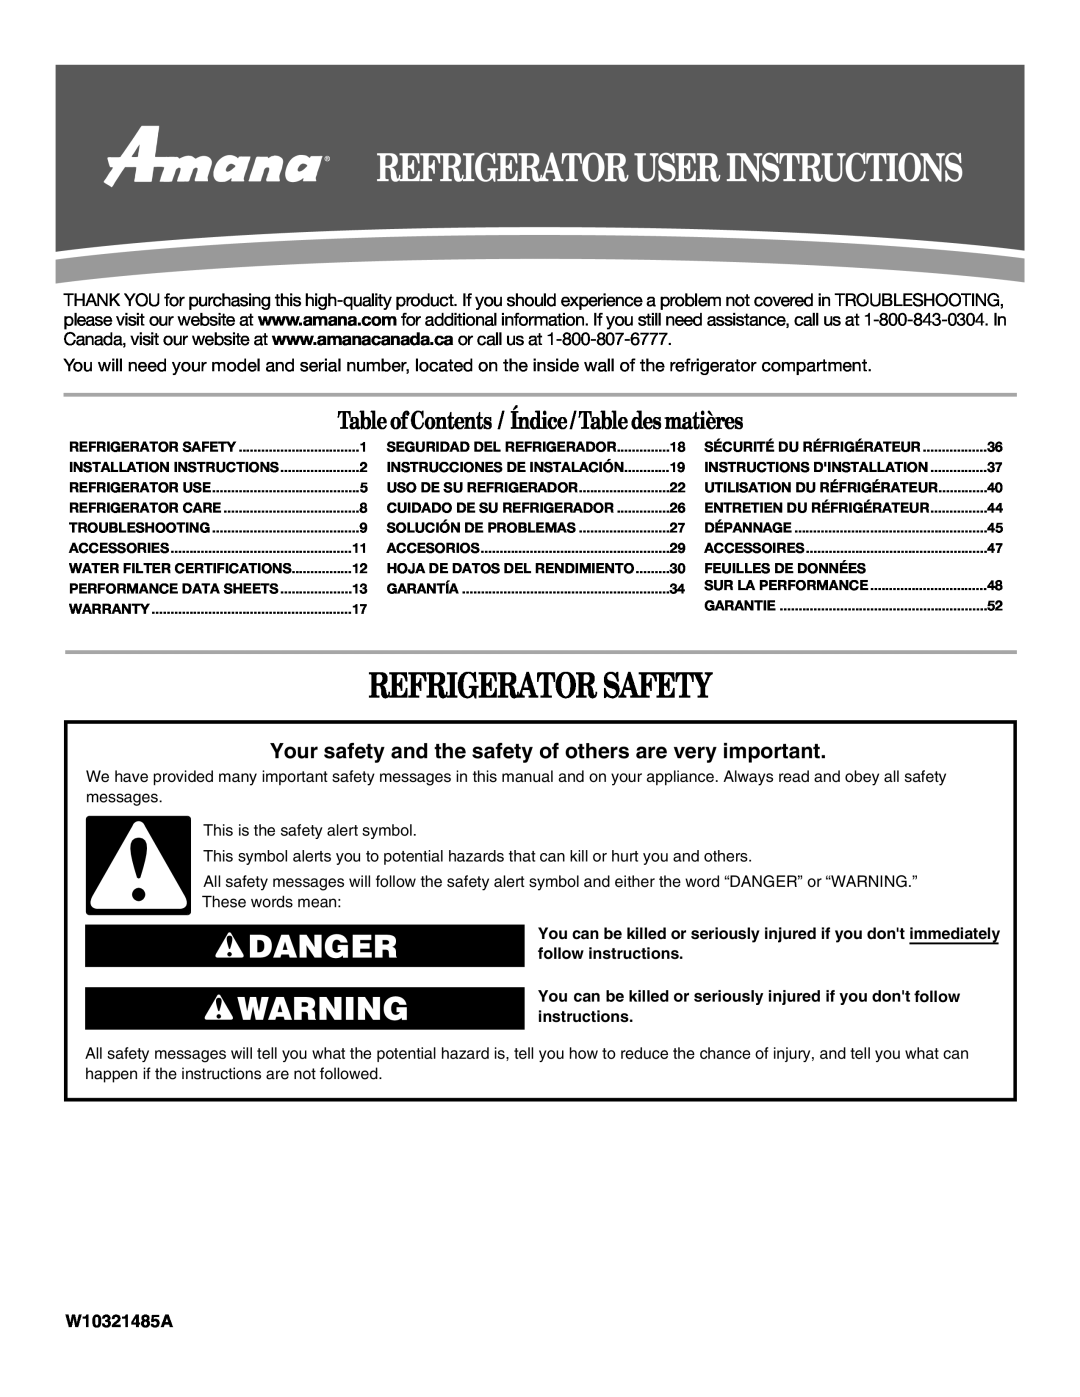 Amana W10321485A installation instructions Refrigerator Safety, Danger, Table ofContents / Índice / Table des matières 